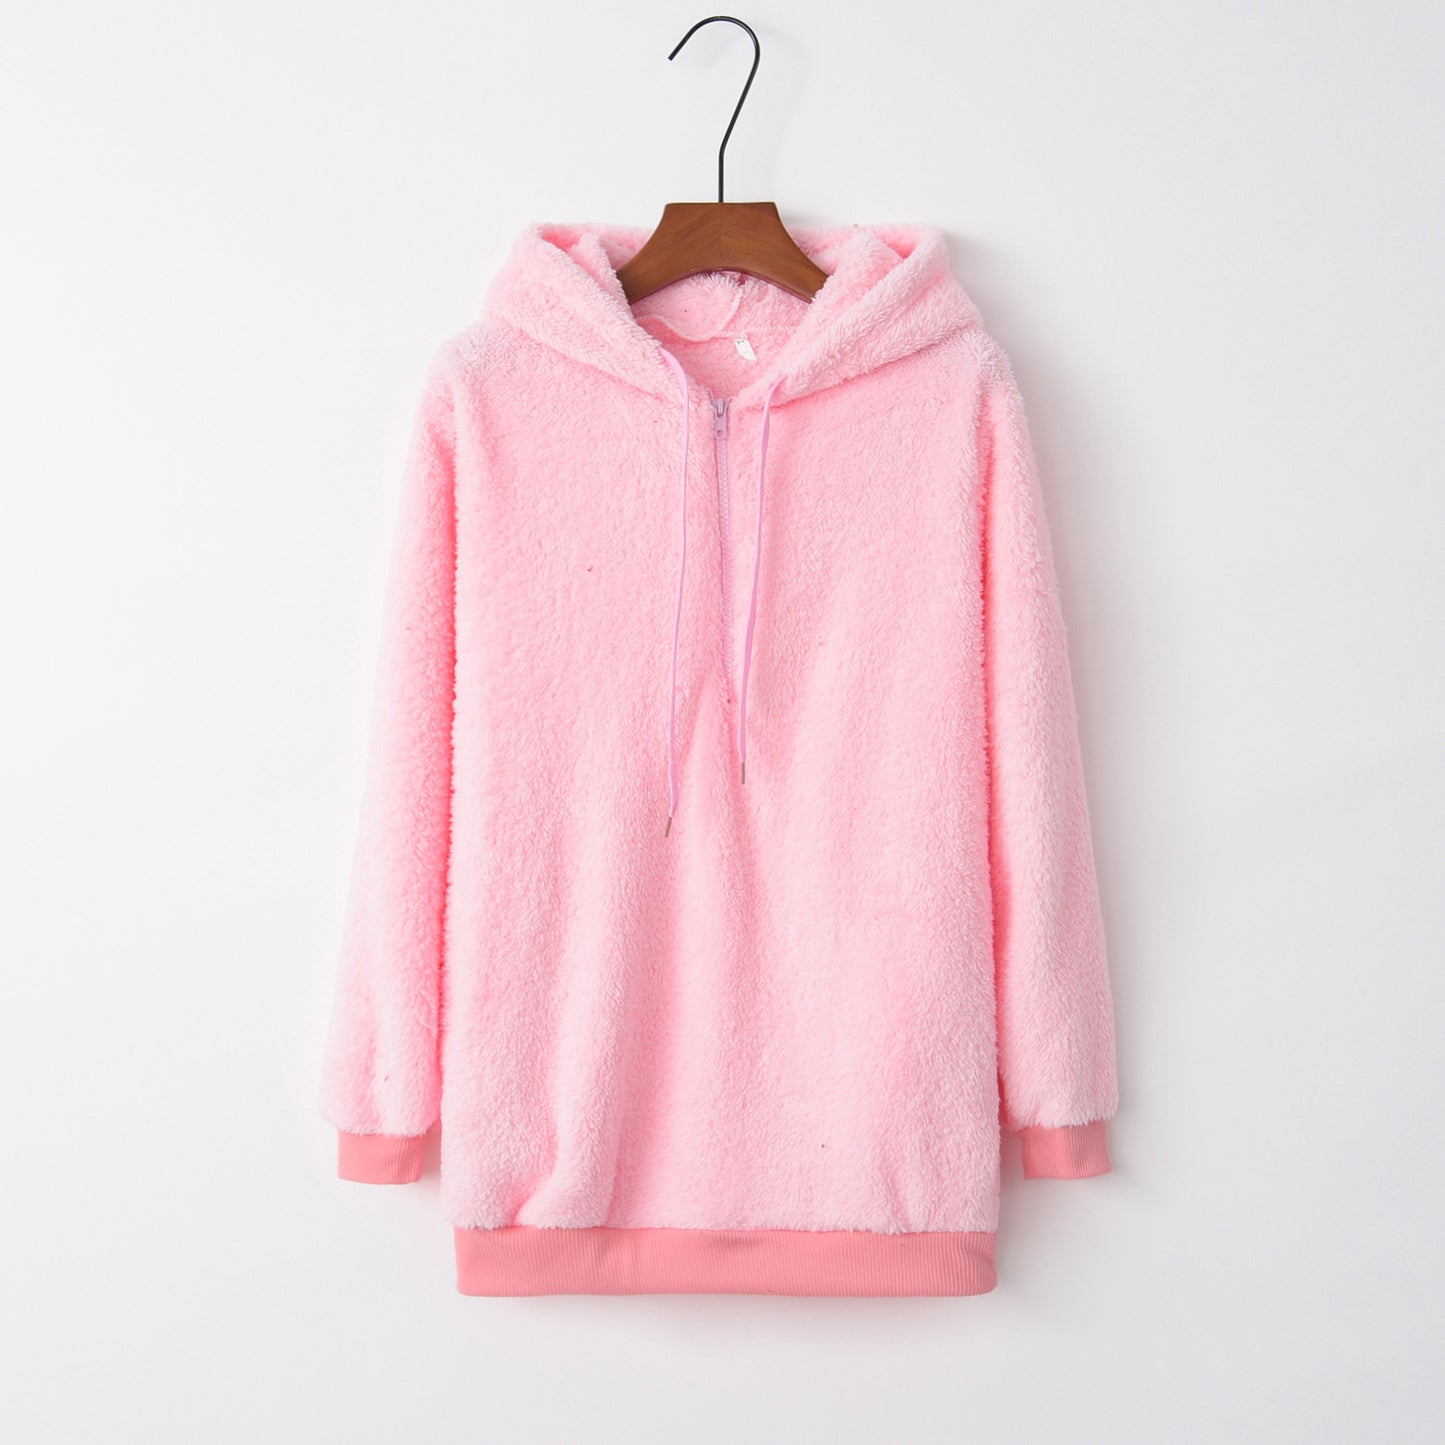 Solid Color Women's Long-Sleeved Hooded Sweater Coat